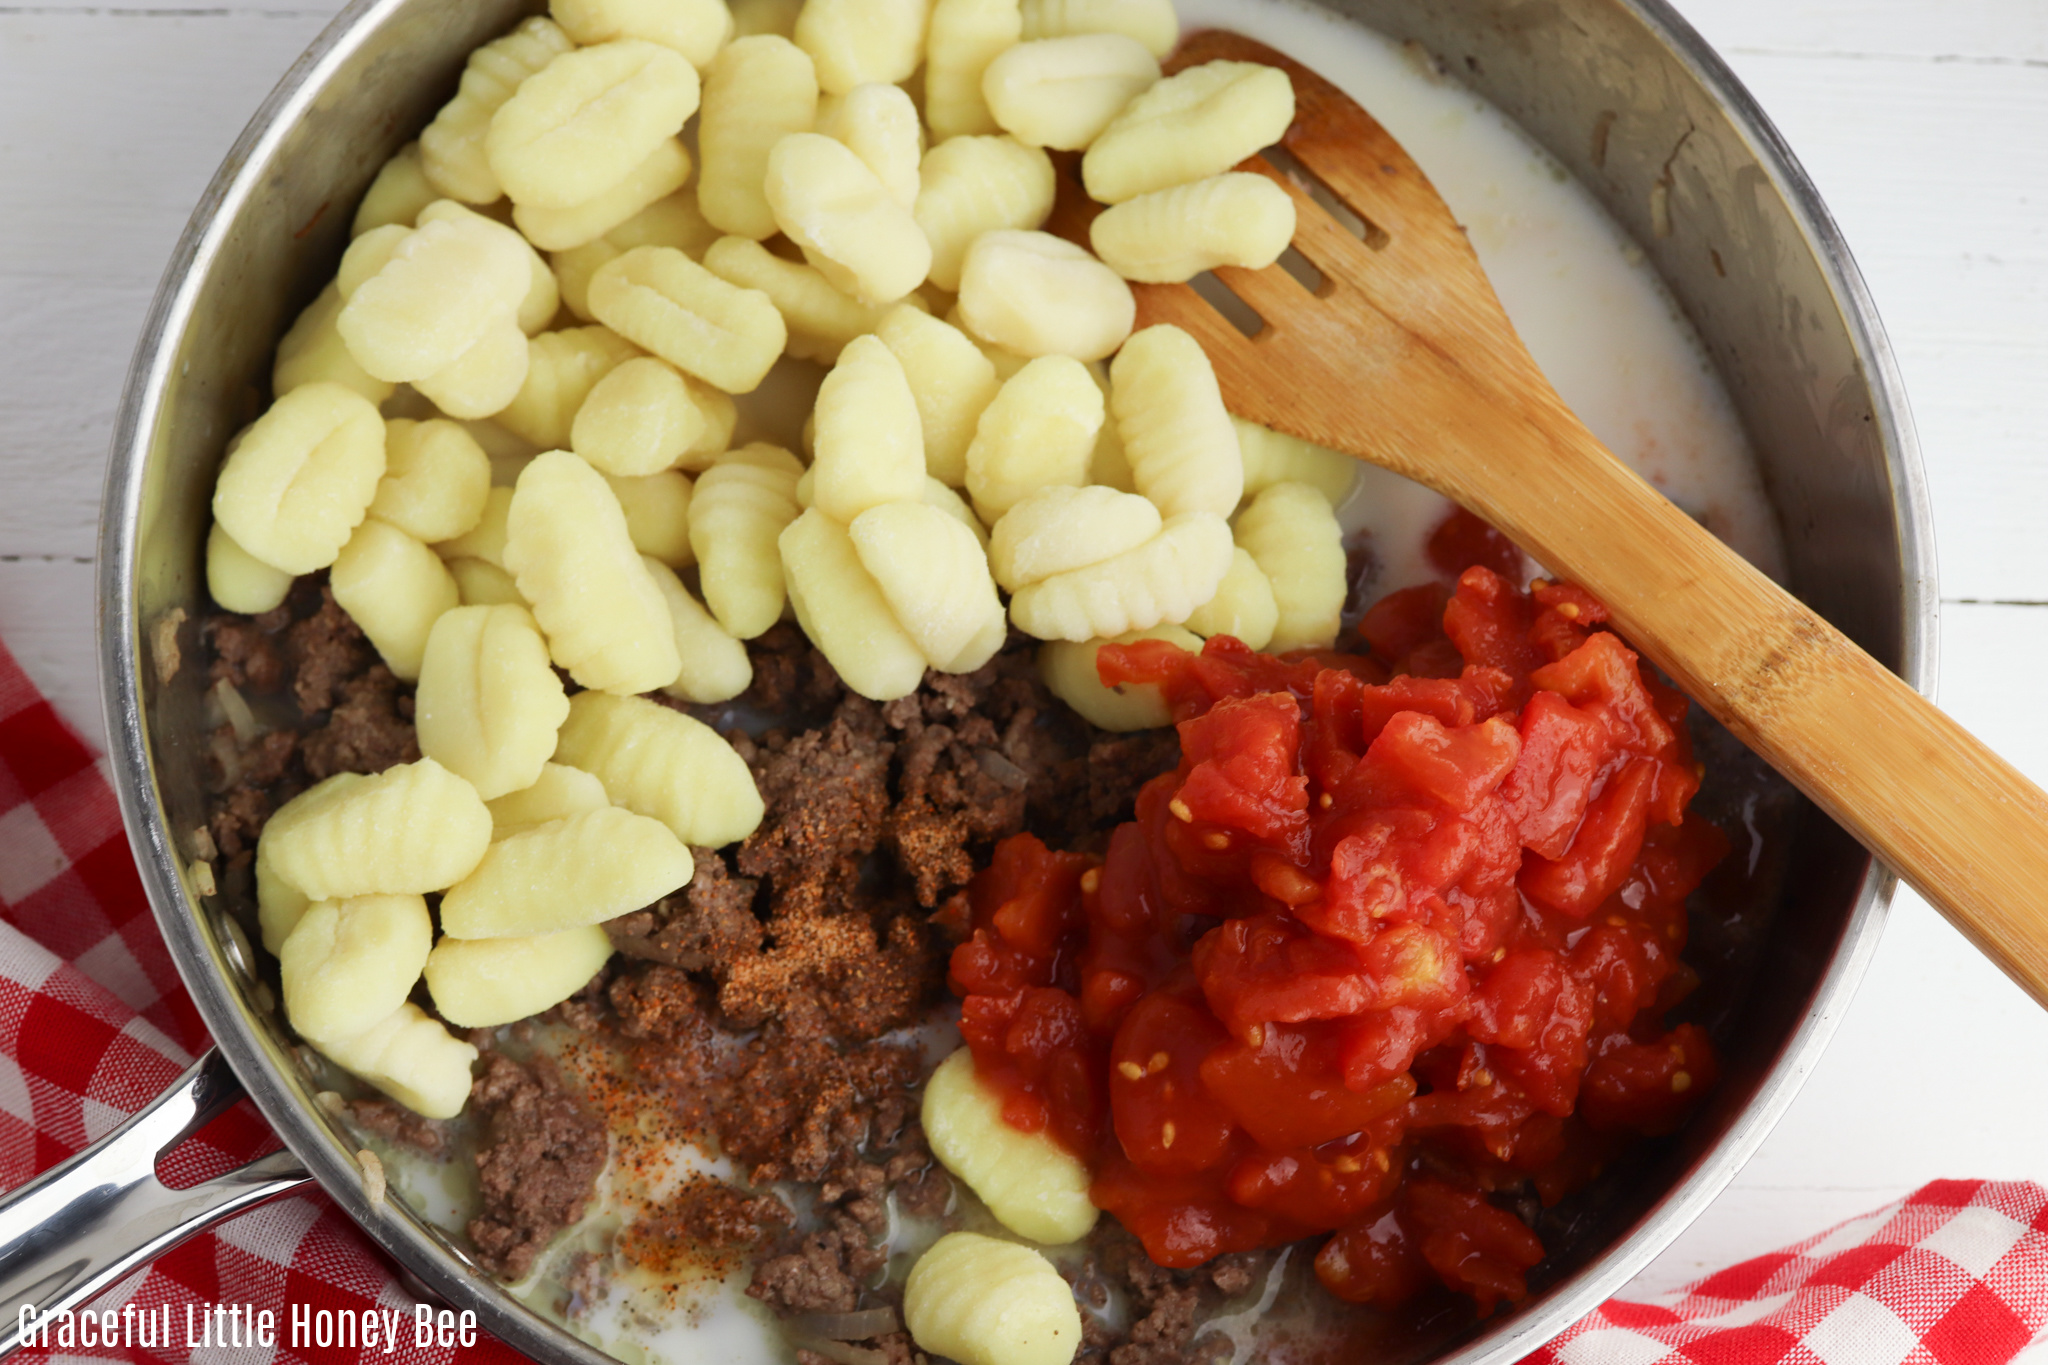 Uncooked gnocchi, diced tomatoes and cooked beef in pan before being stirred together.